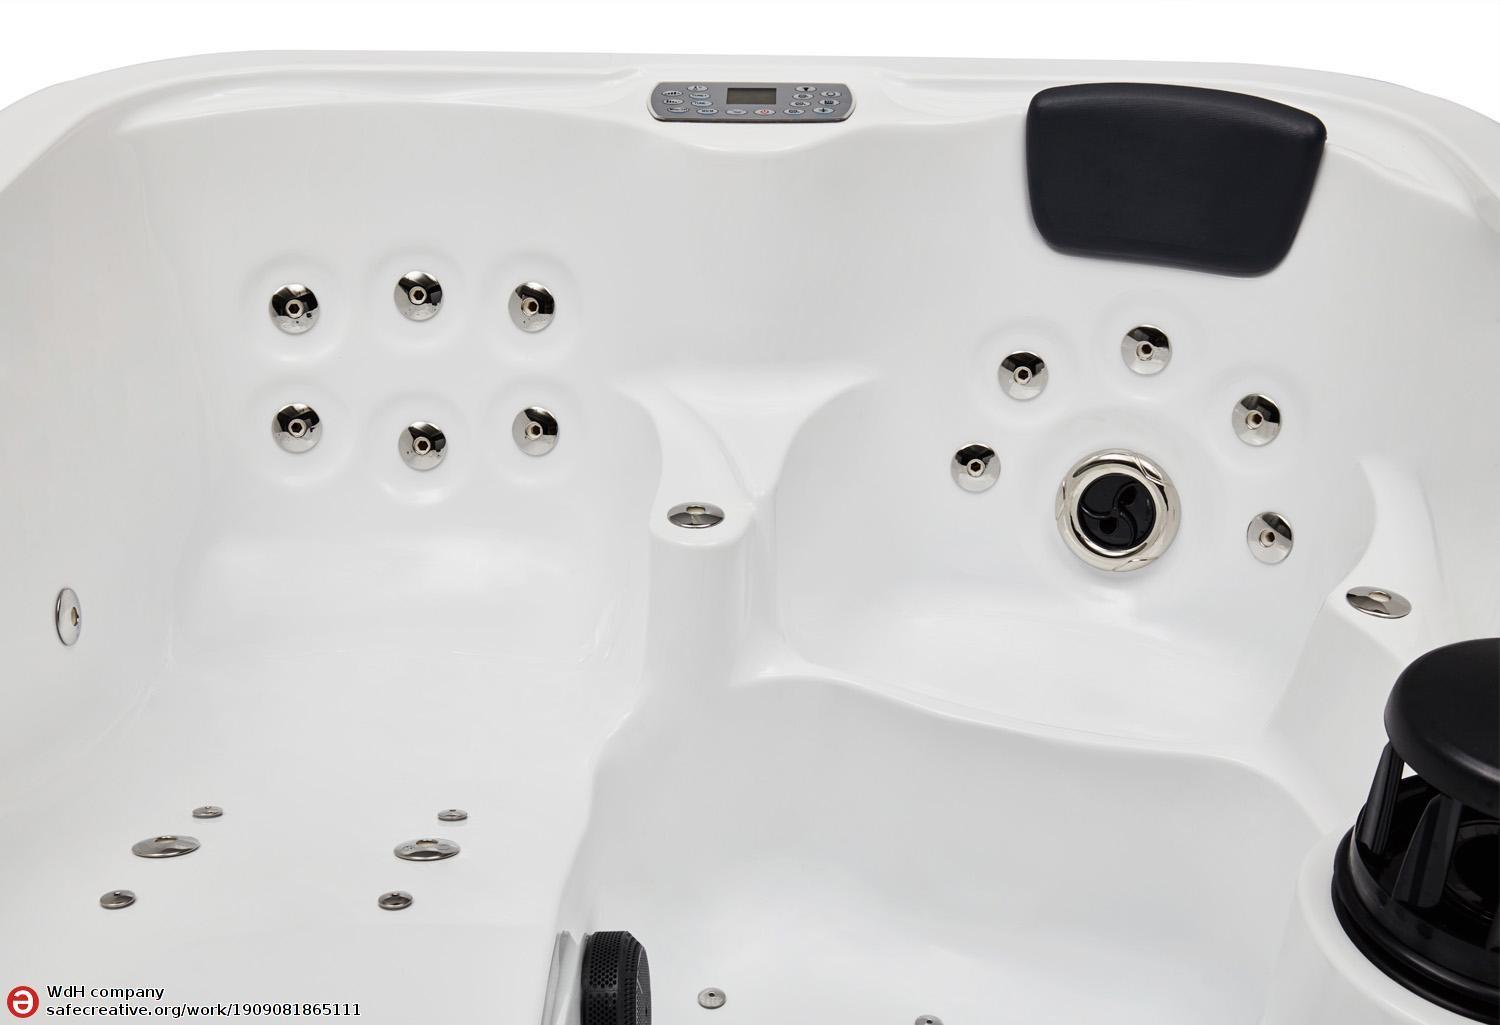 Spa jacuzzi exterior AS-008B